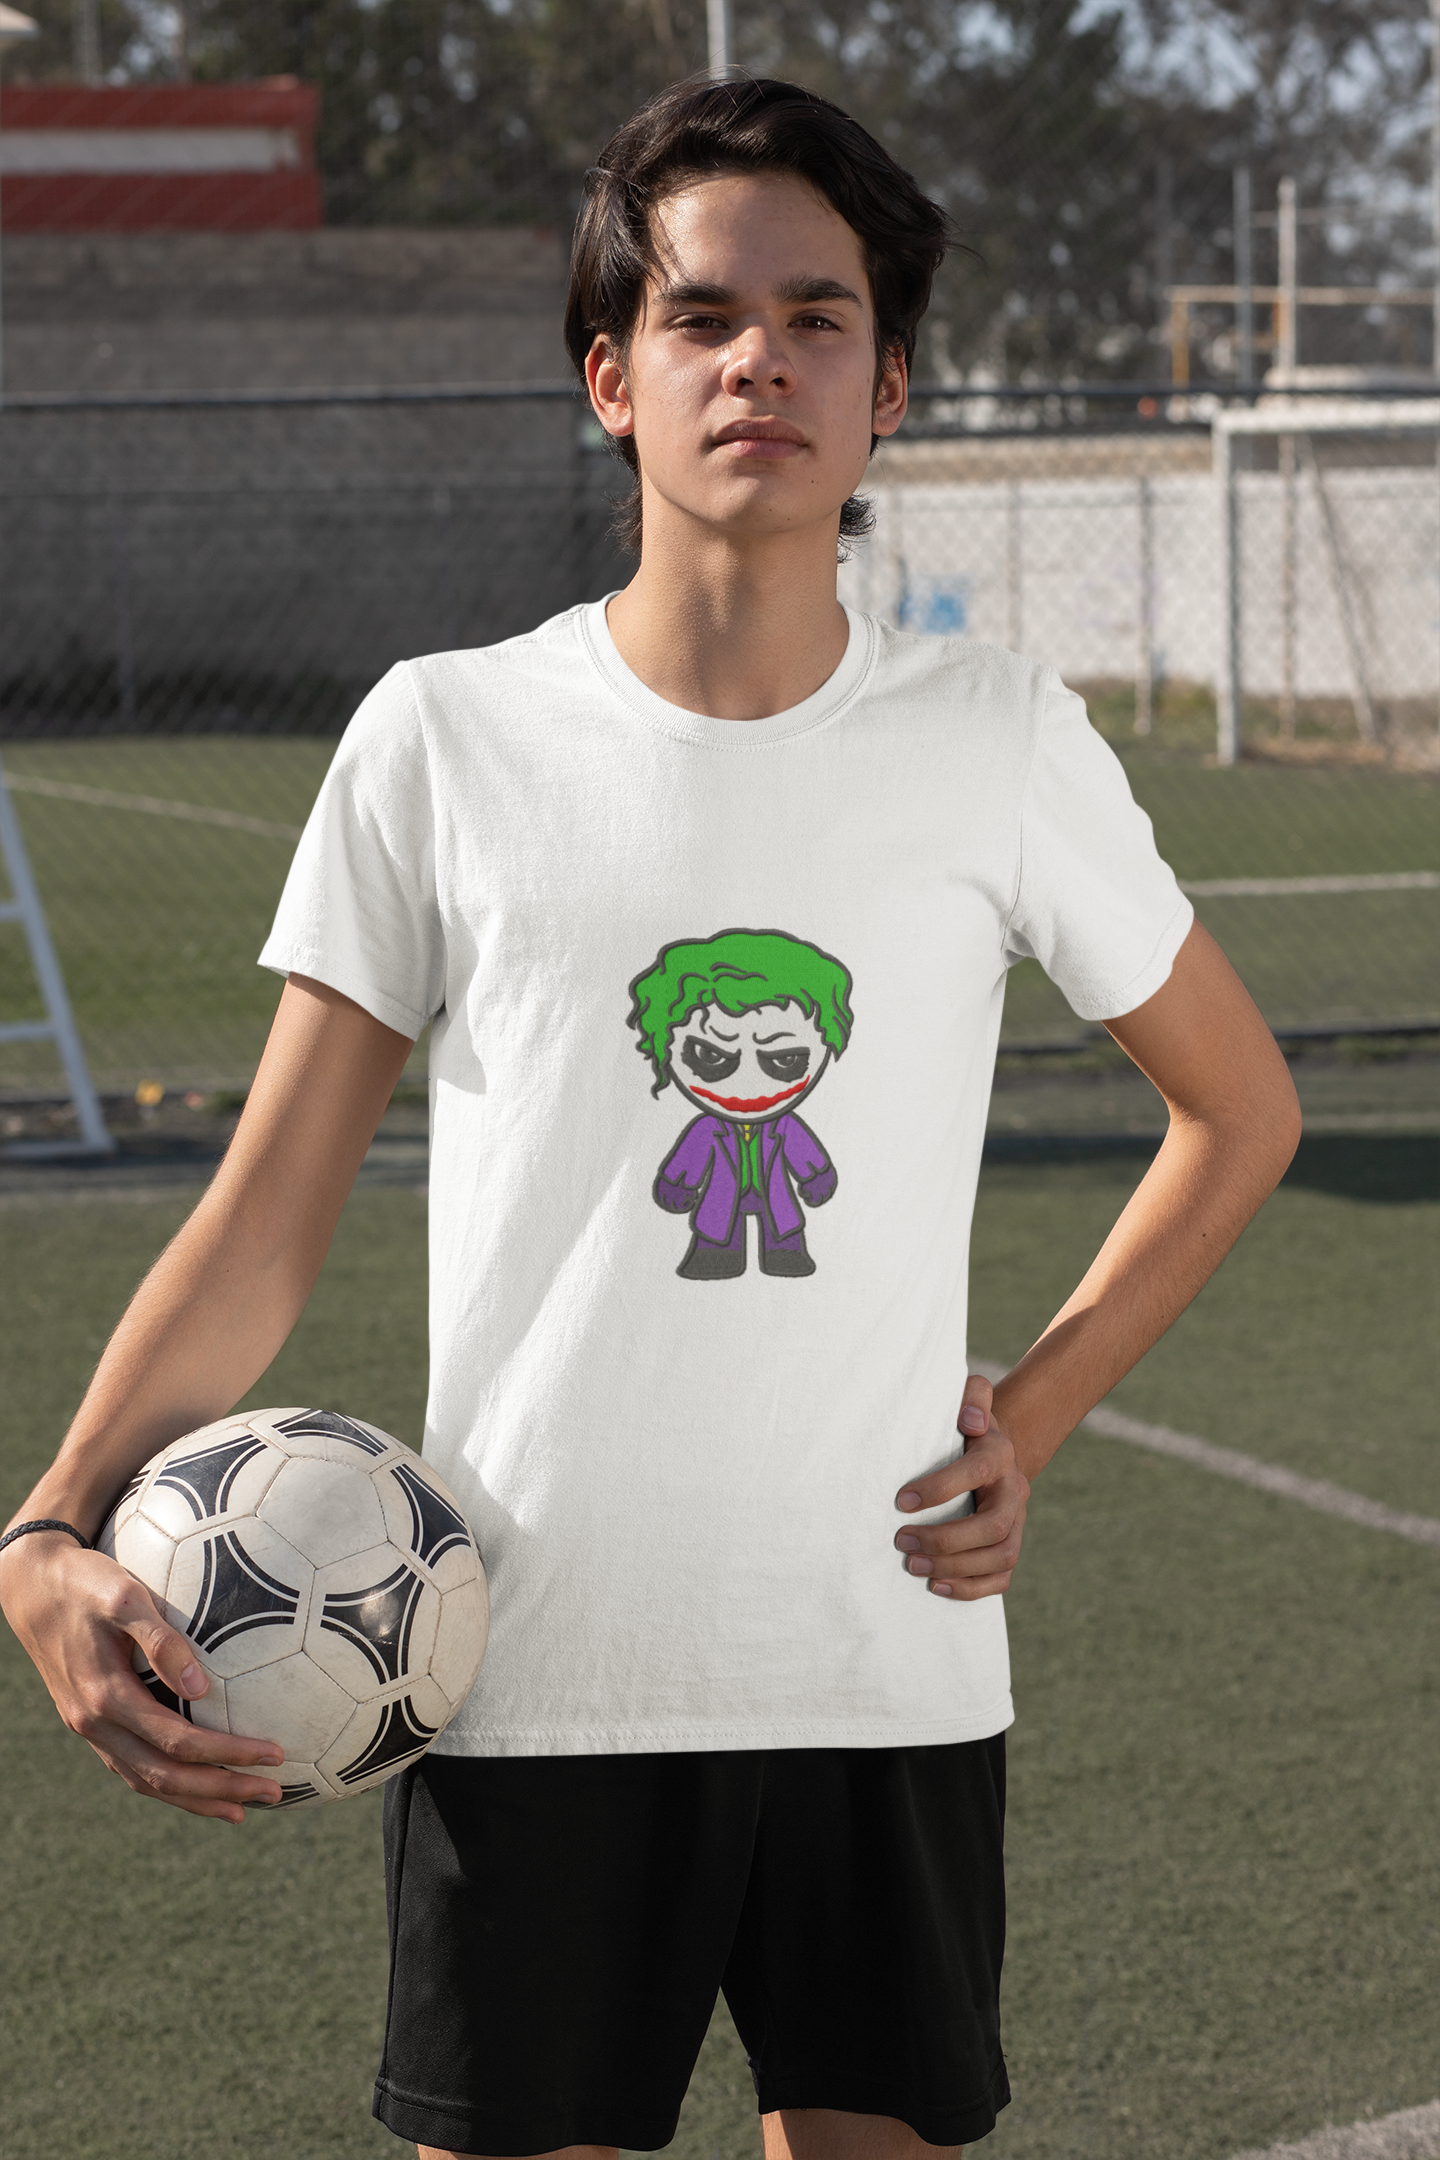 Embroidered t-shirt with Joker design